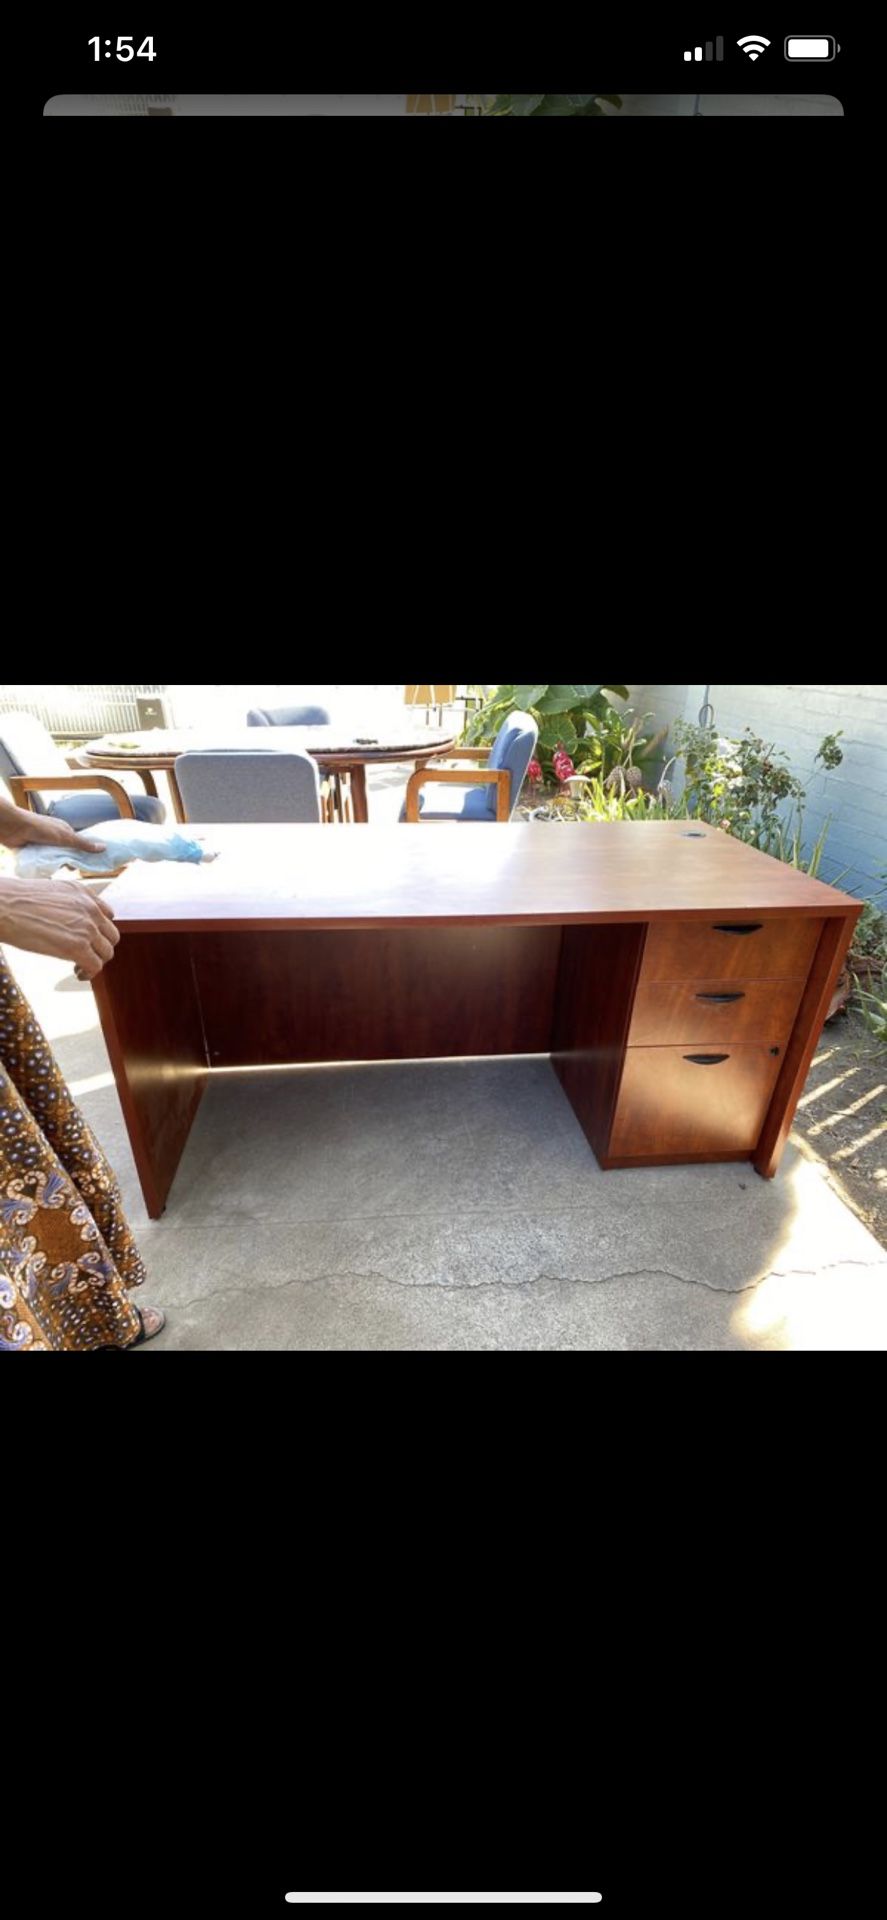 Office Desk 60 by 30 inch, with 3 drawers and key for lock